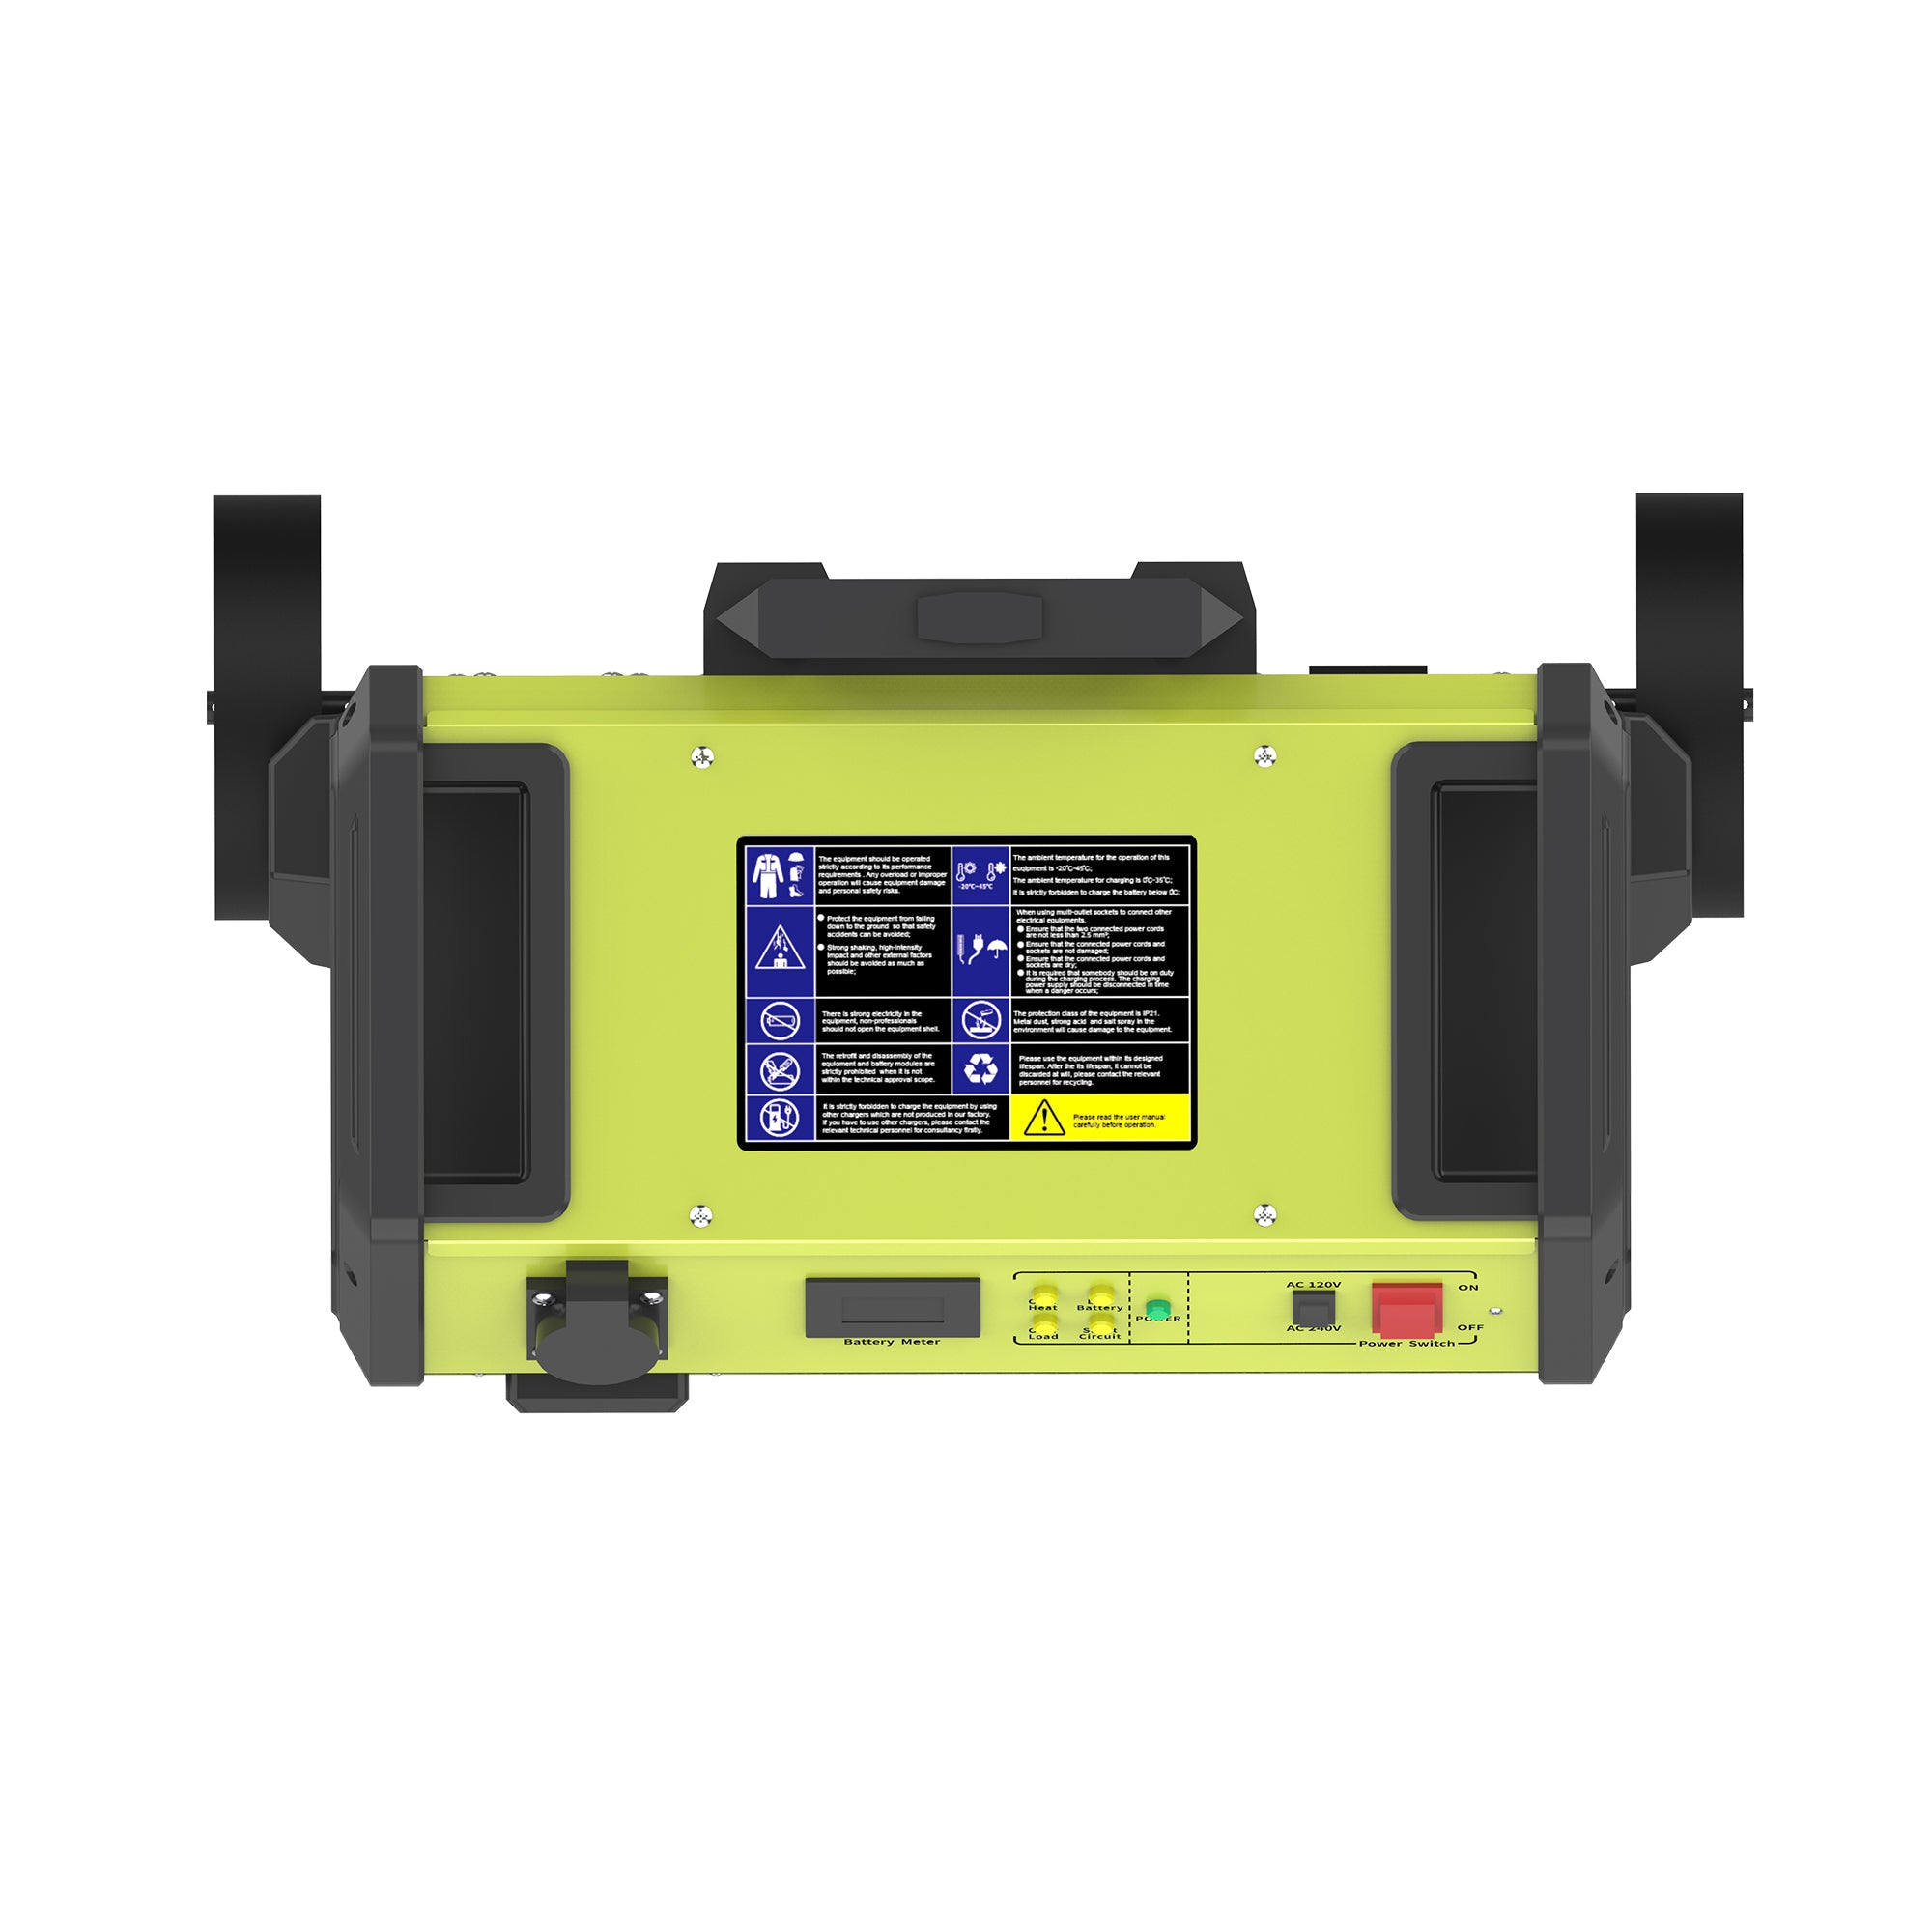 ACOPOWER IP-3526 Rechargeable Portable Industrial Power Station Battery Supply High Power Output Battery Generator